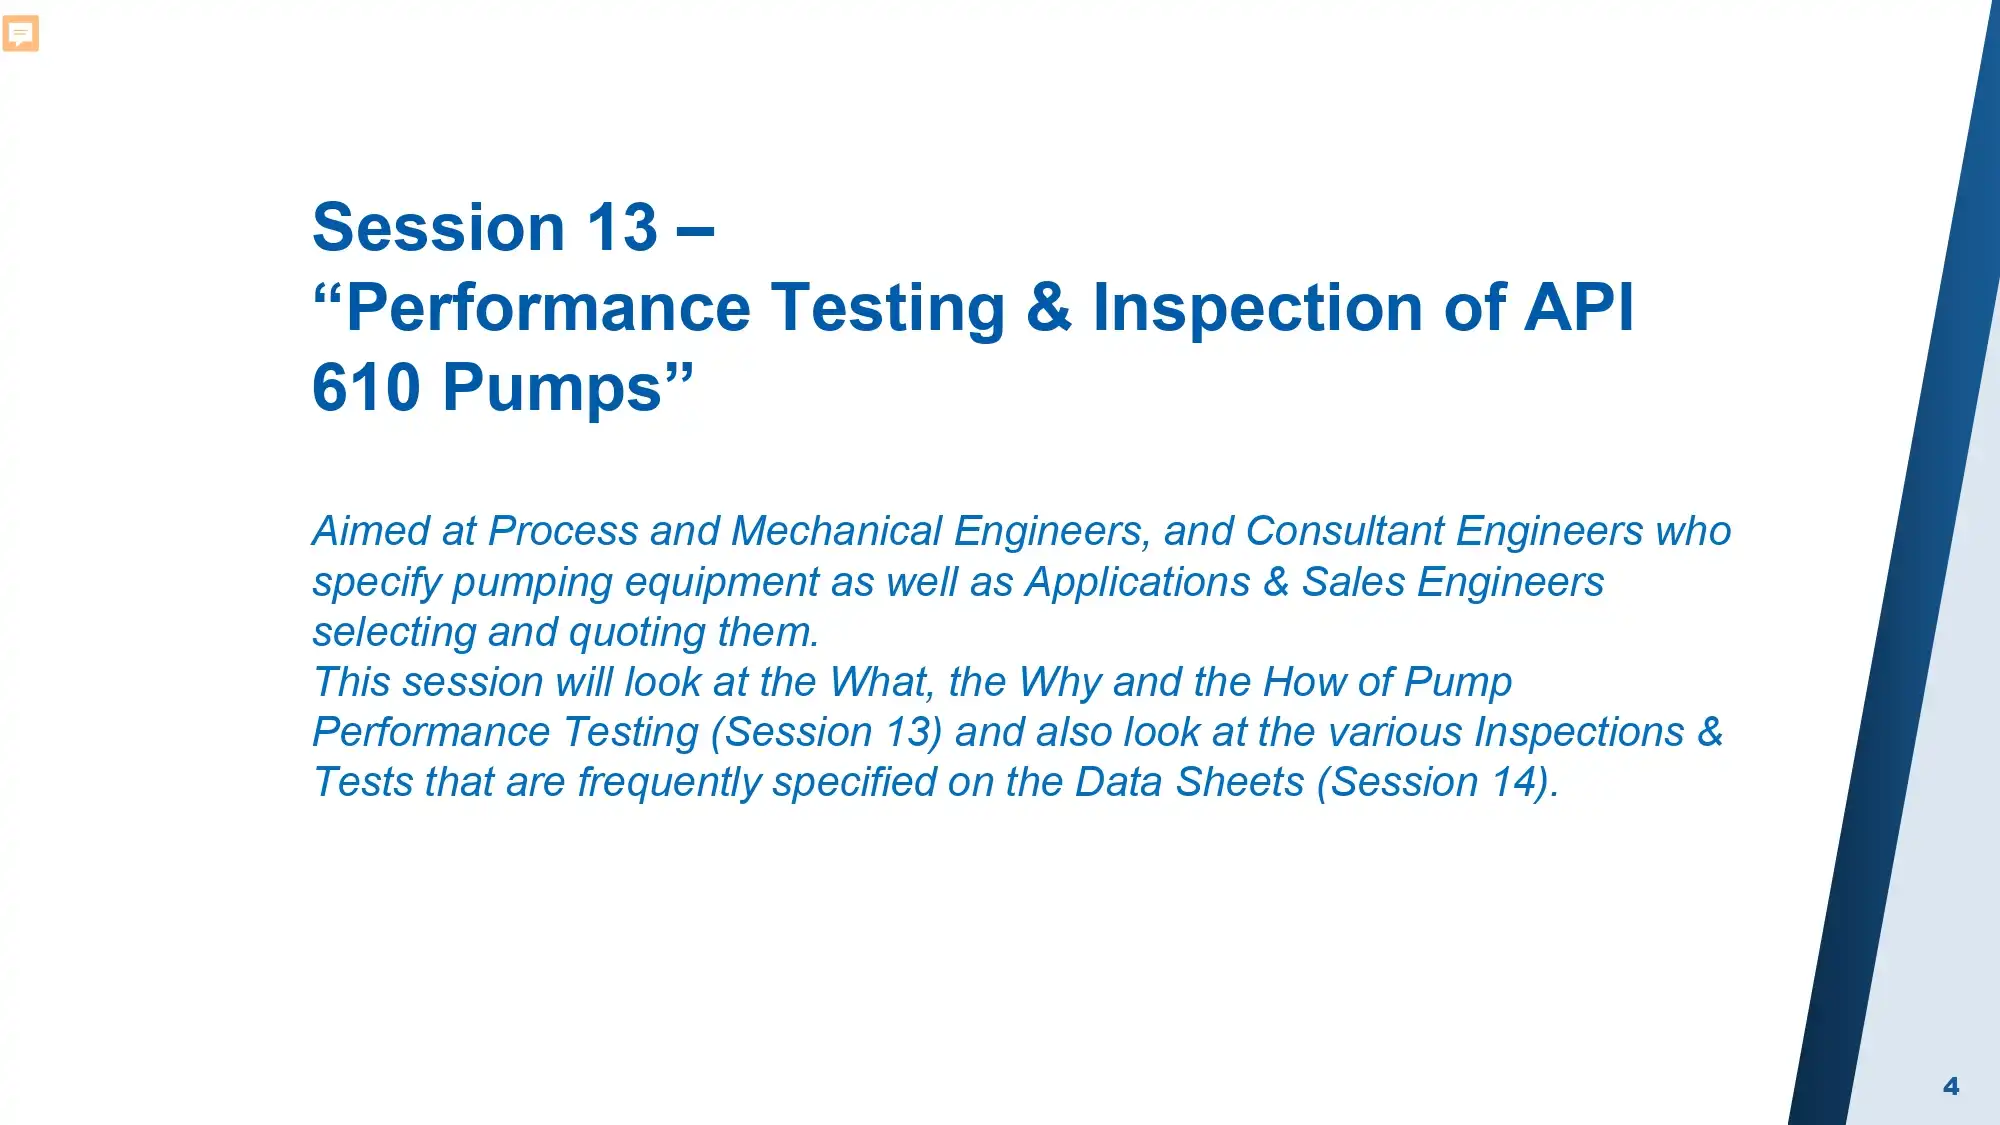 Session 13 – “Performance Testing & Inspection of API 610 Pumps”